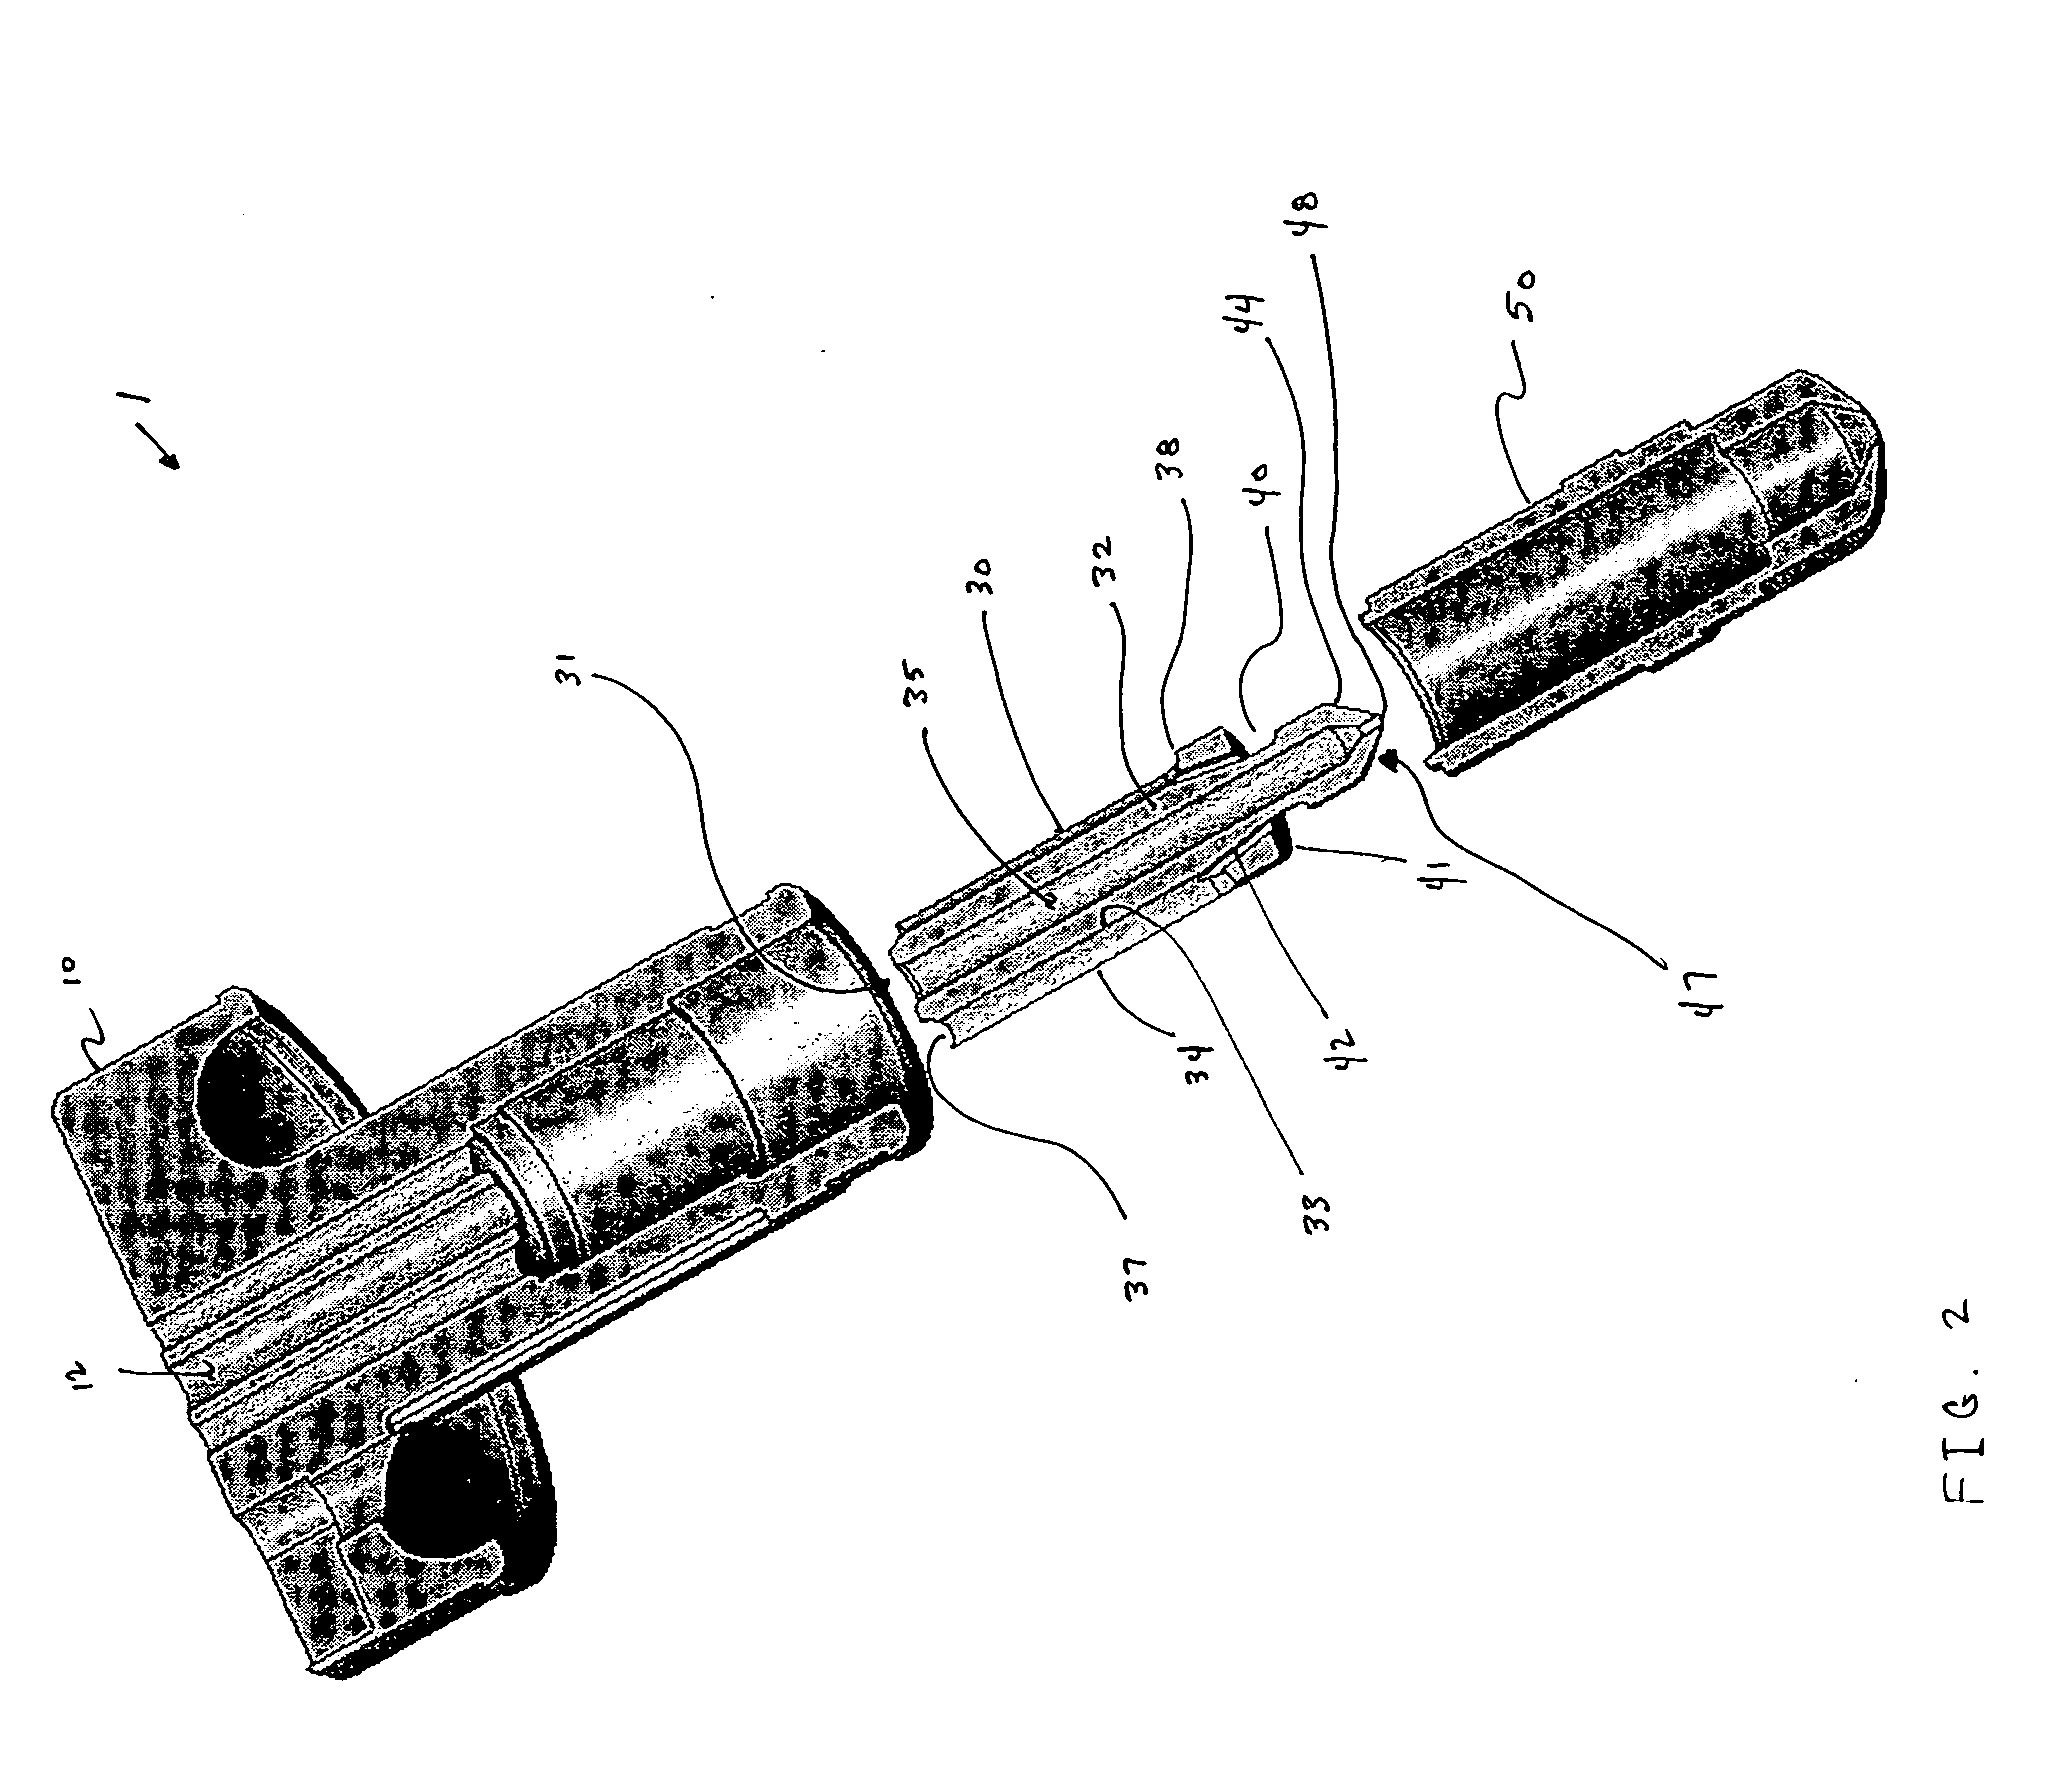 Co-injection nozzle, method of its use, and resulting golf ball